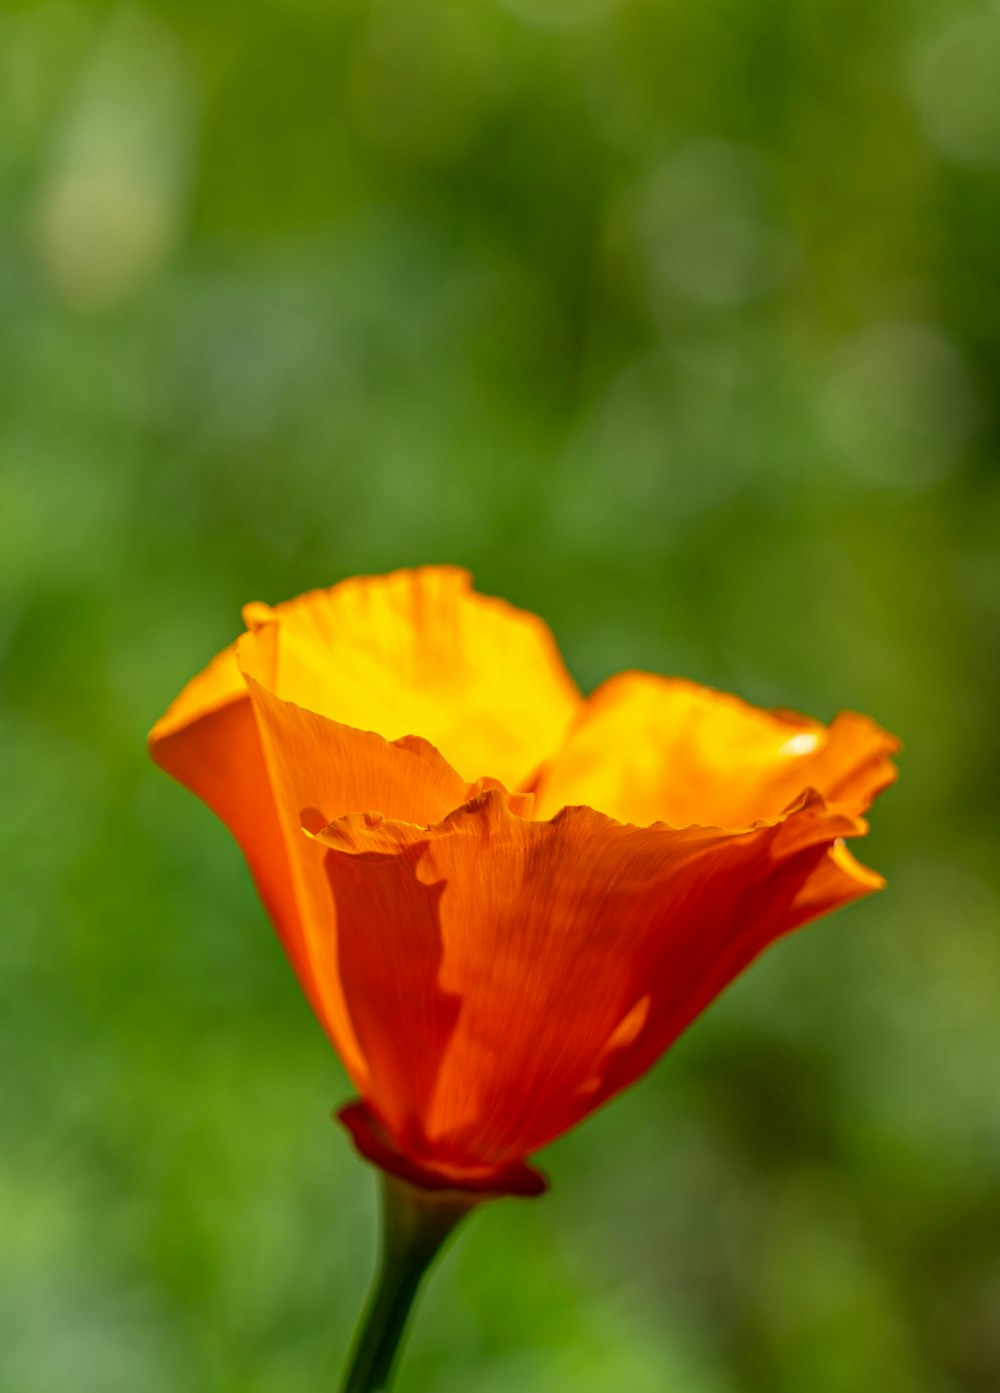 a single orange flower with a blurry background